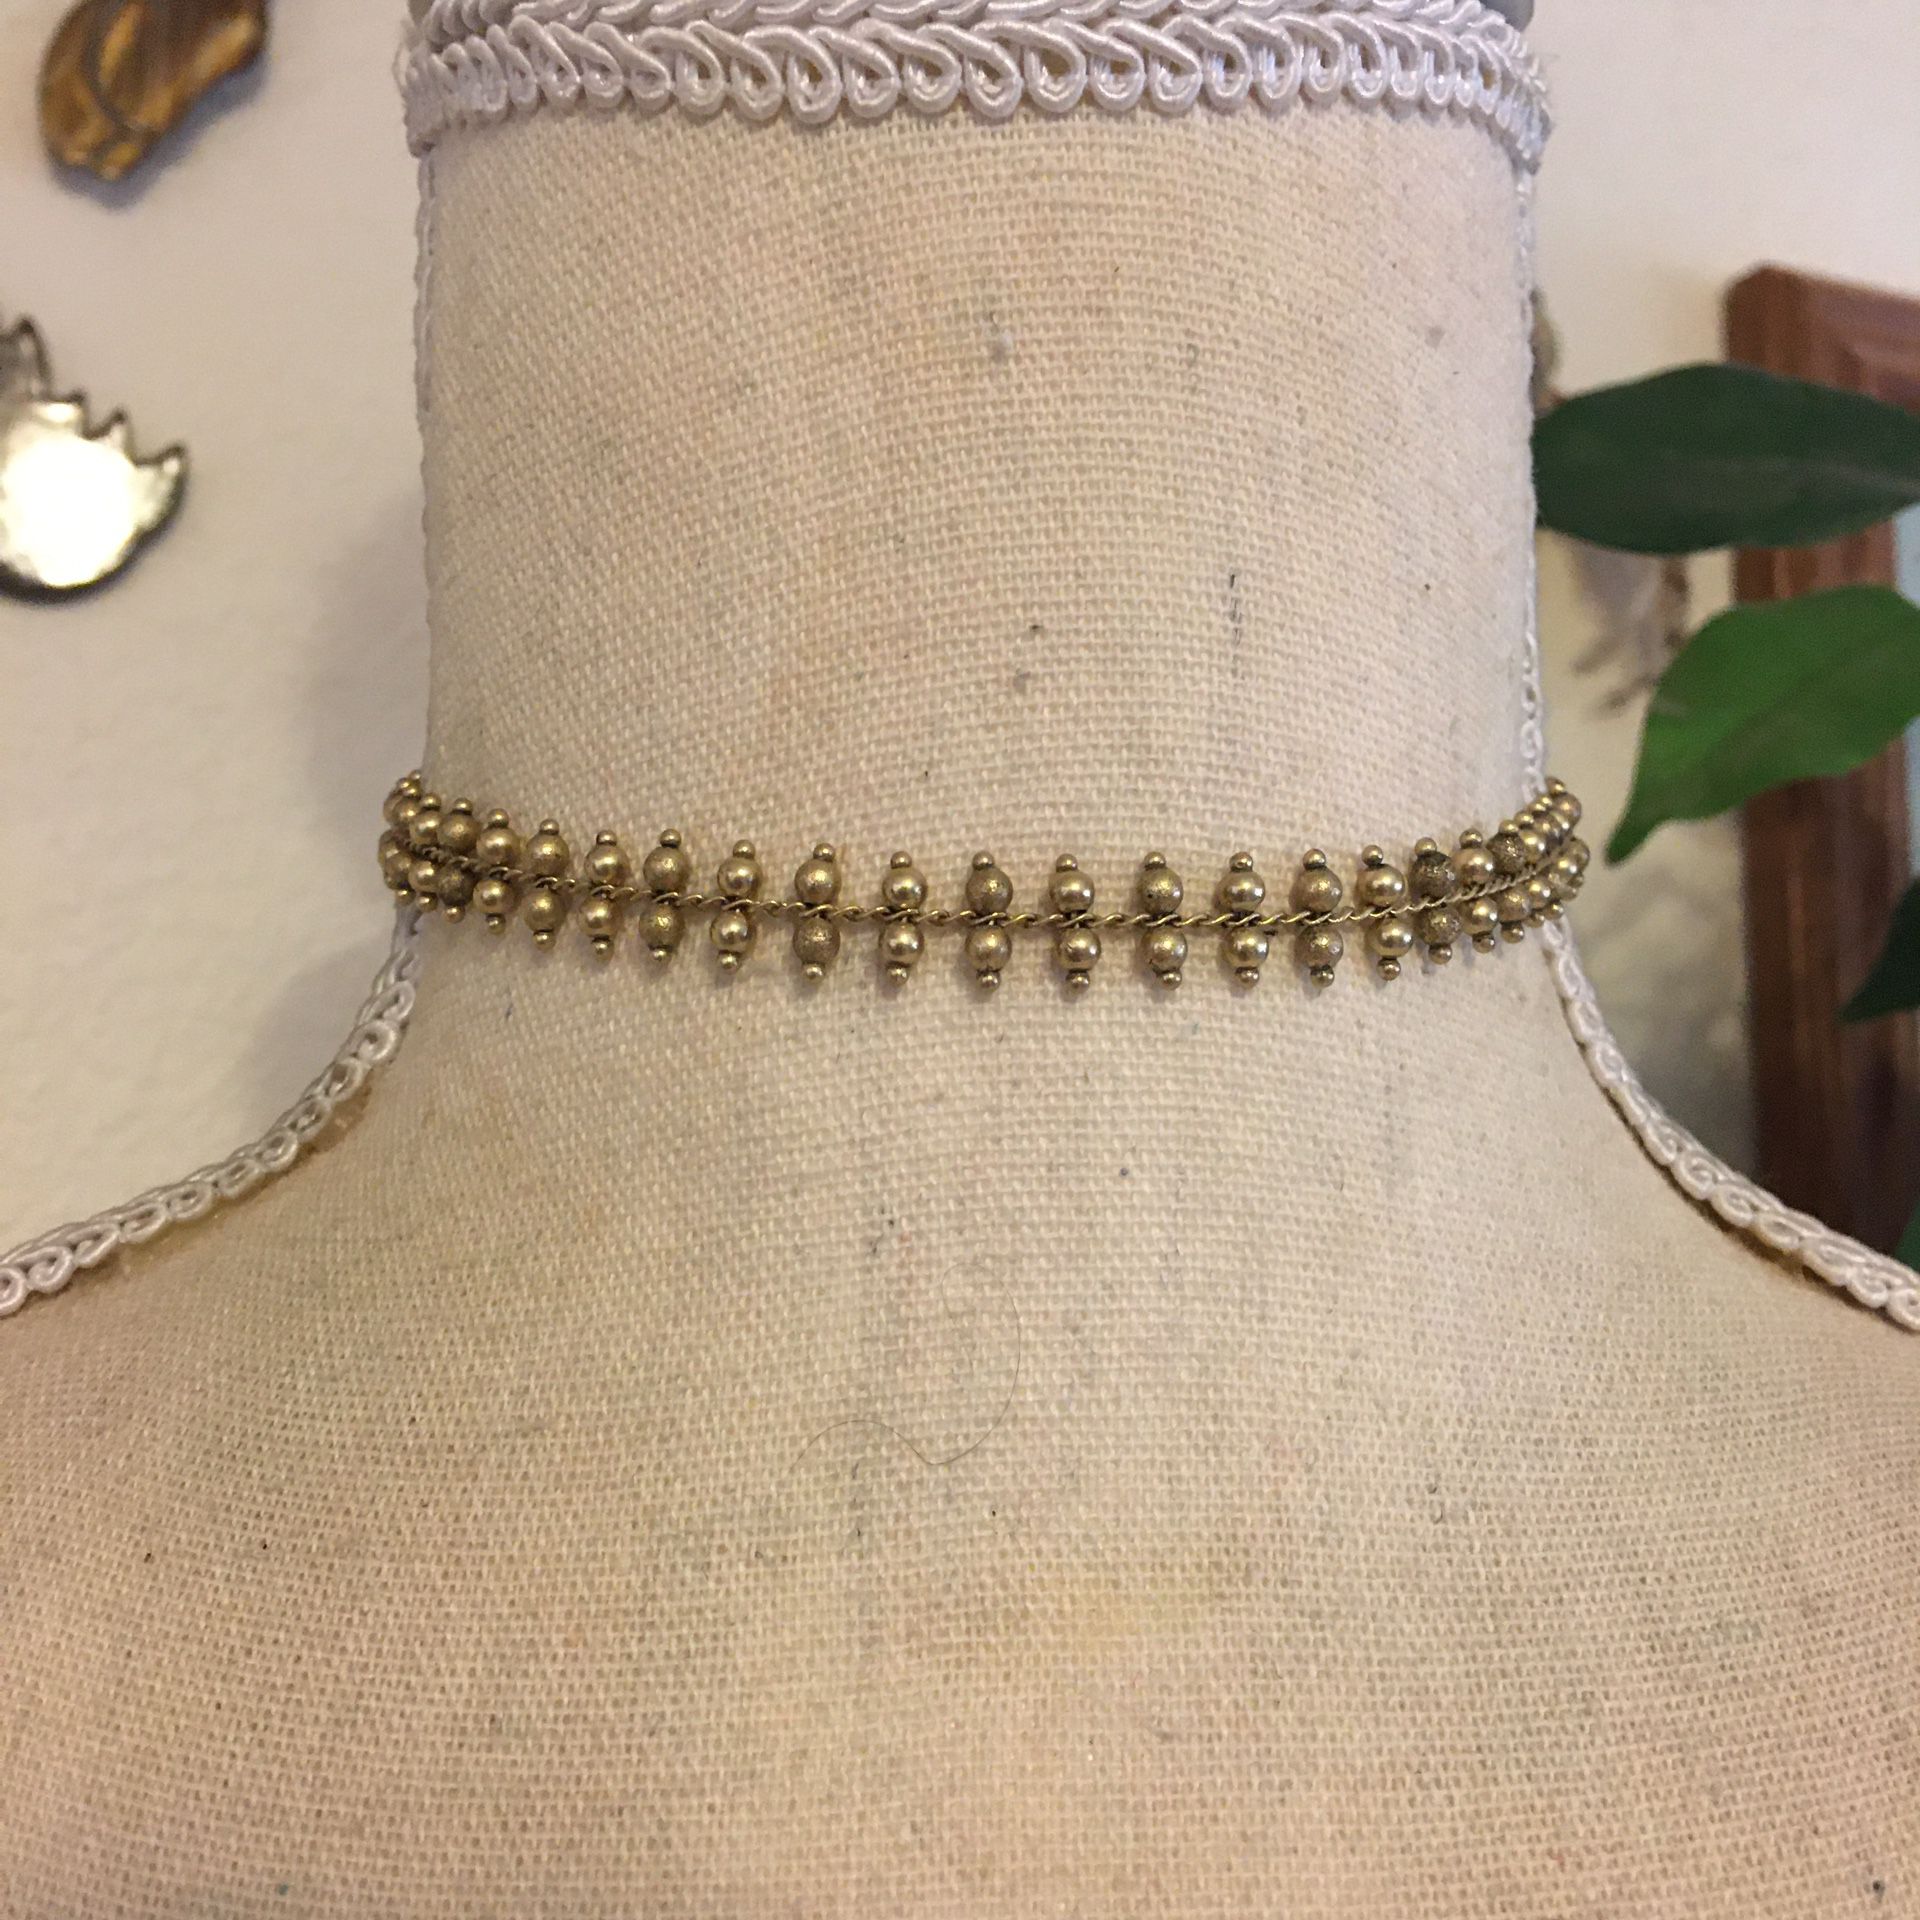 Vintage double row gold tone bead choker necklace